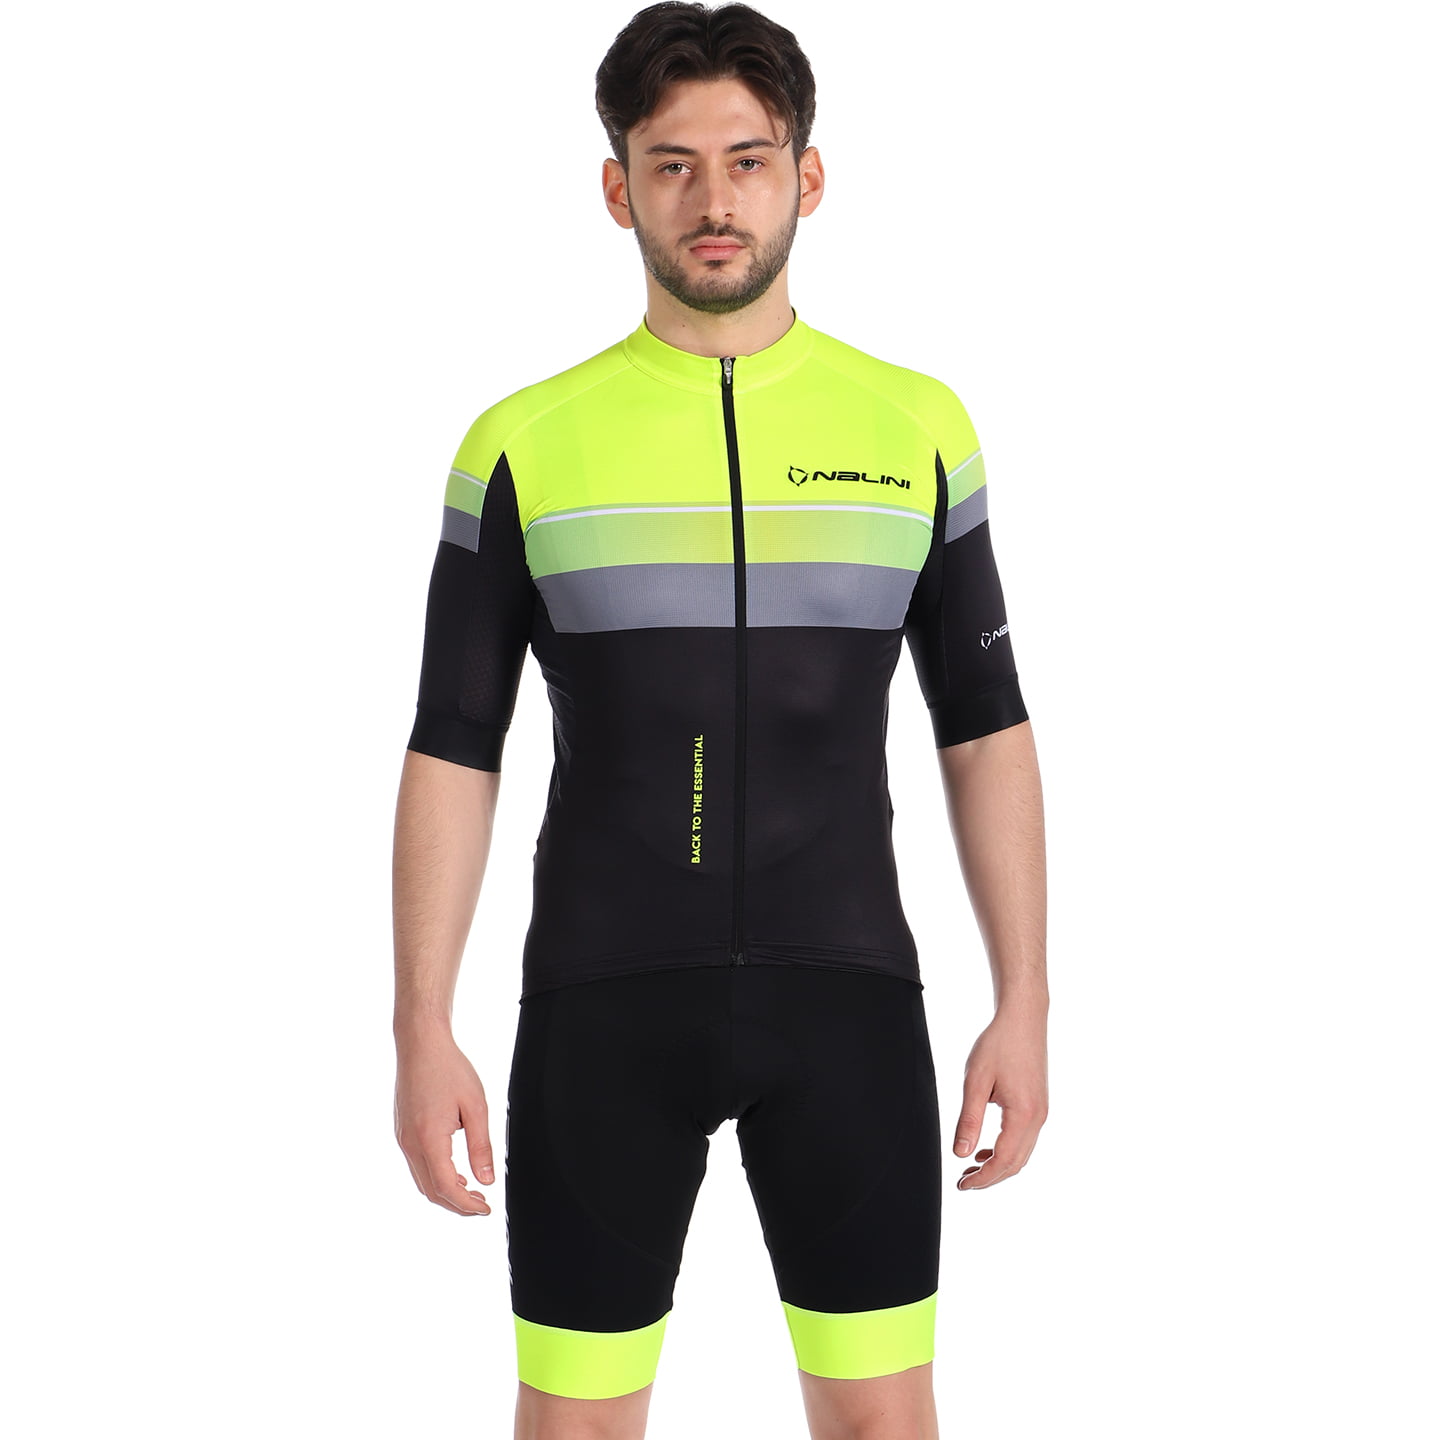 NALINI New Speed Set (cycling jersey + cycling shorts) Set (2 pieces), for men